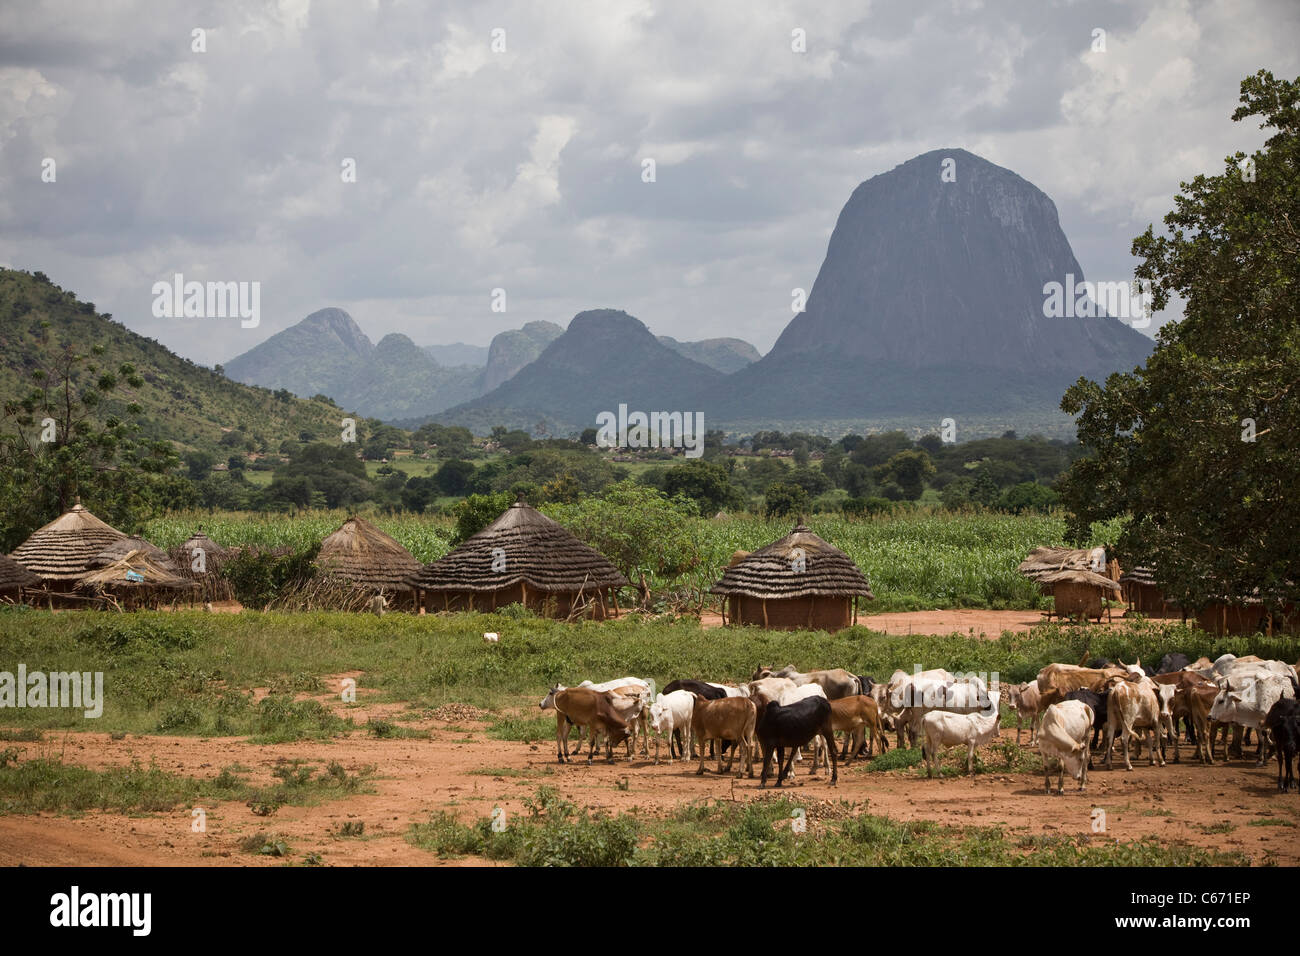 Hills rise above grass huts in Abim district, northern Uganda, East Africa. Stock Photo